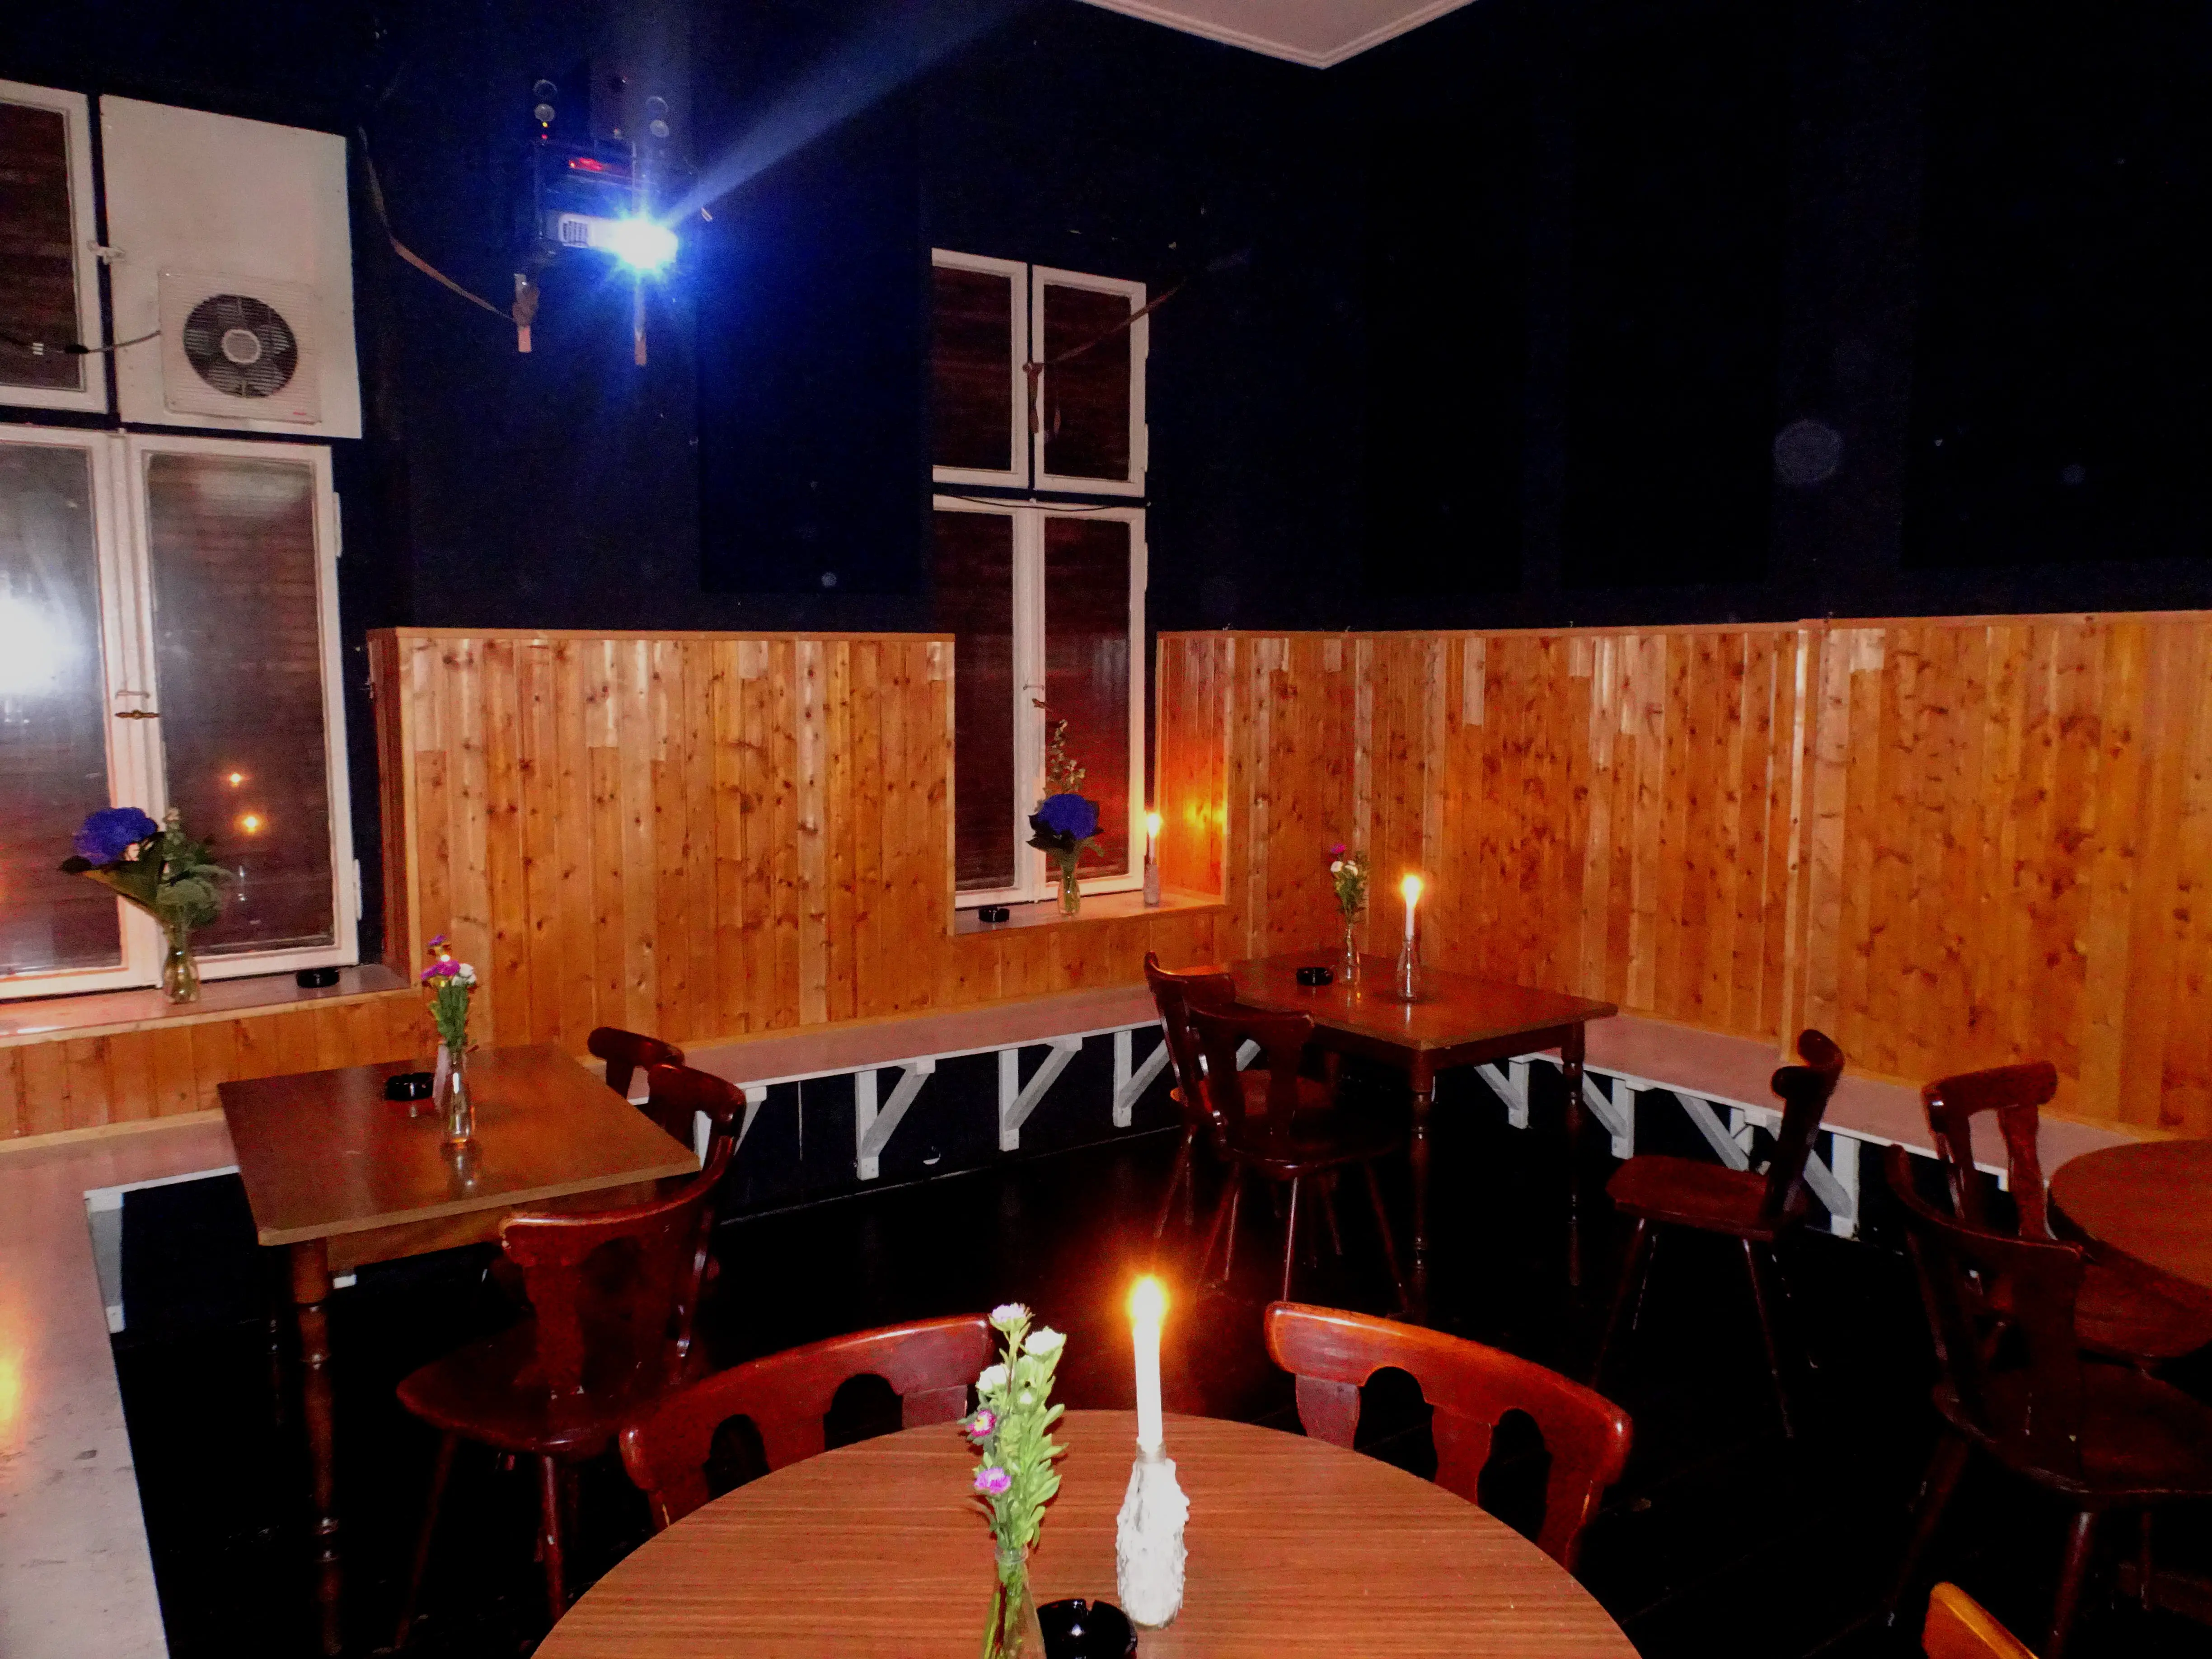 A wood-panelled restaurant interior devoid of people